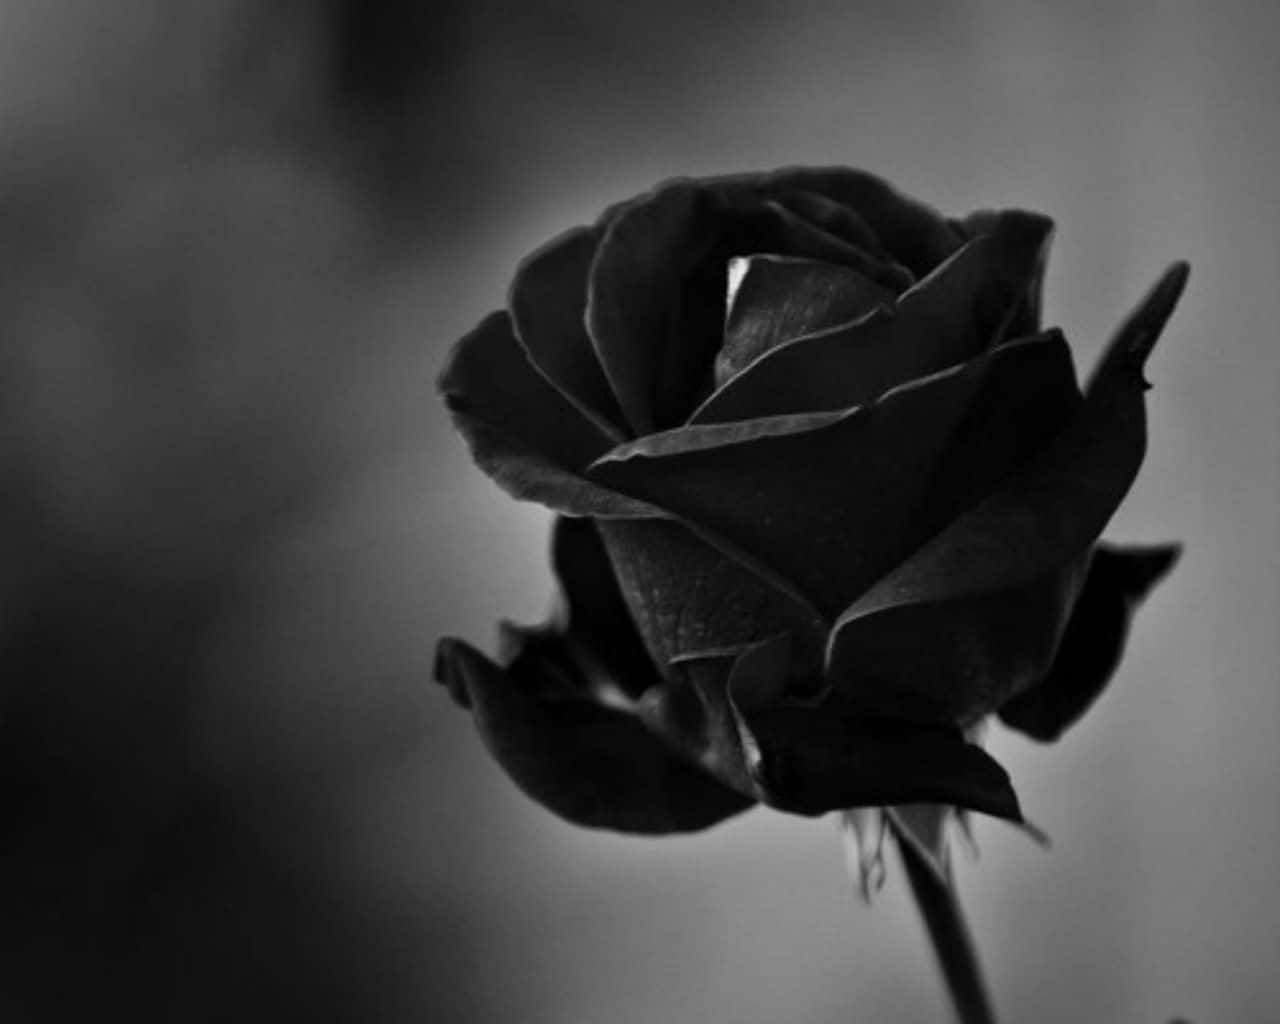 Download "The Mysterious Black Rose A Symbol Of Tragedy"